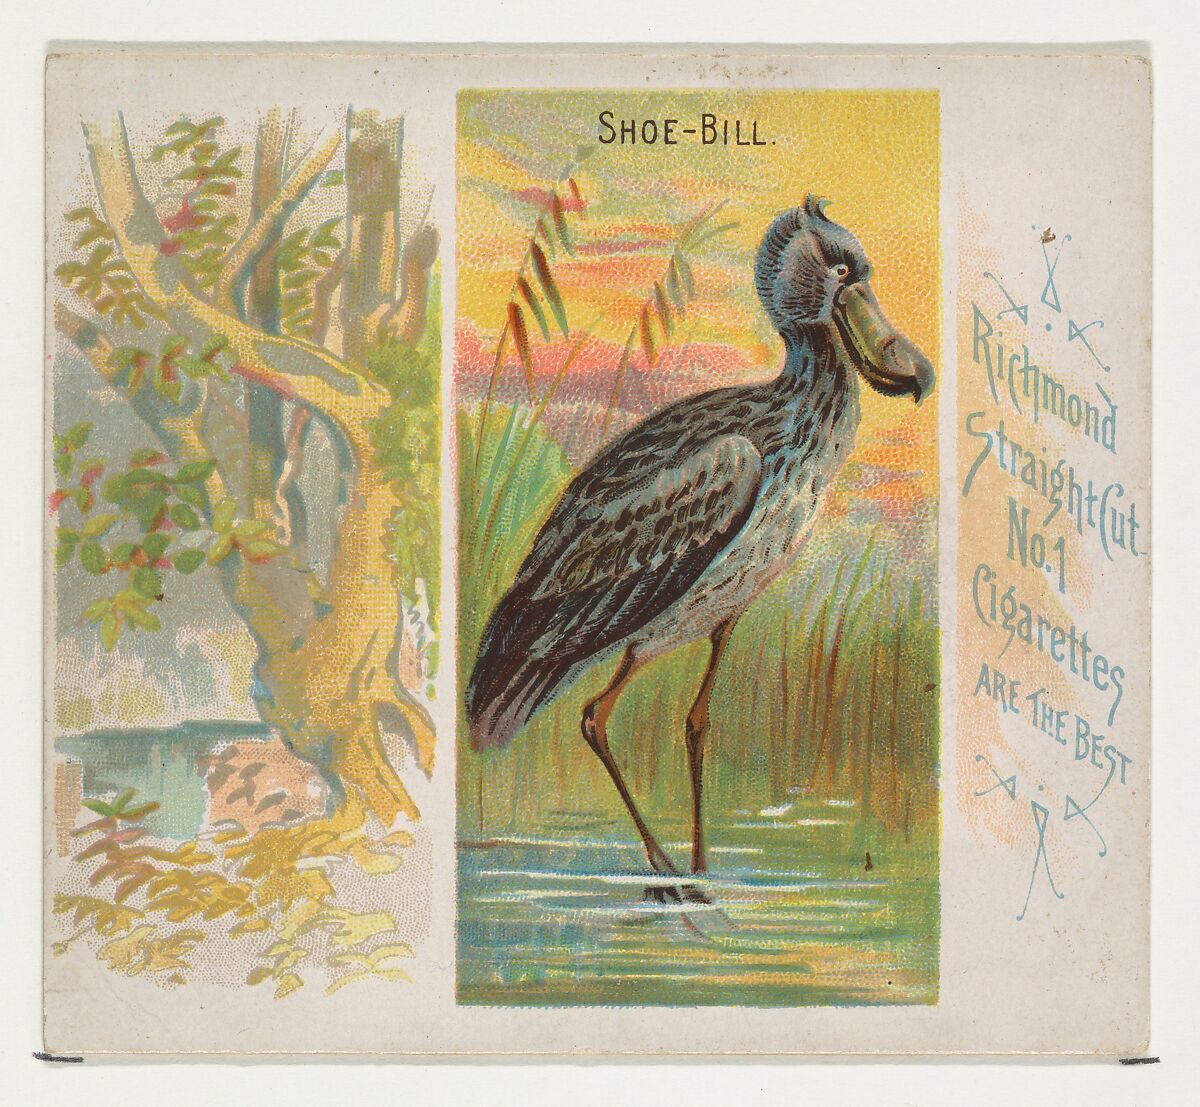 Shoe-Bill, from Birds of the Tropics series (N38) for Allen & Ginter Cigarettes, Issued by Allen &amp; Ginter (American, Richmond, Virginia), Commercial color lithograph 